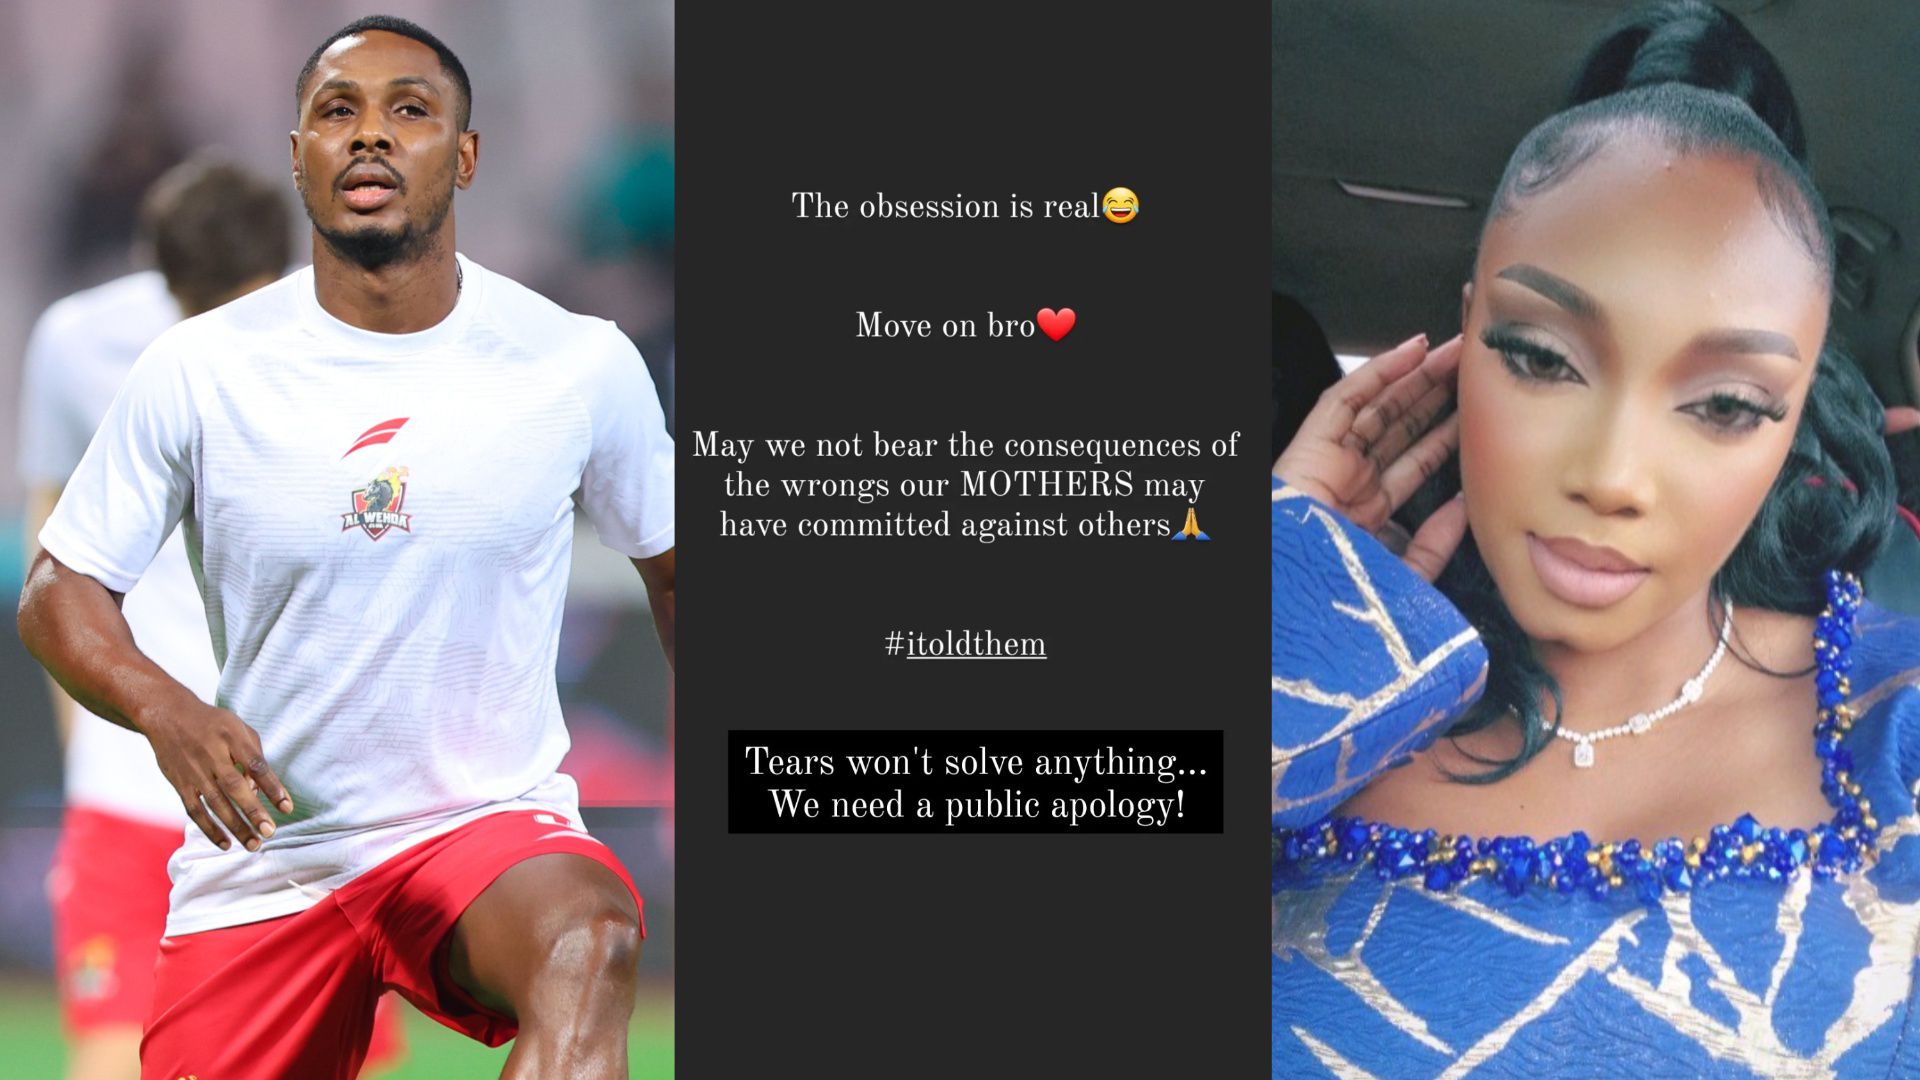 Ighalo’s estranged wife accuses him of affairs with multiple celebs in IG rant